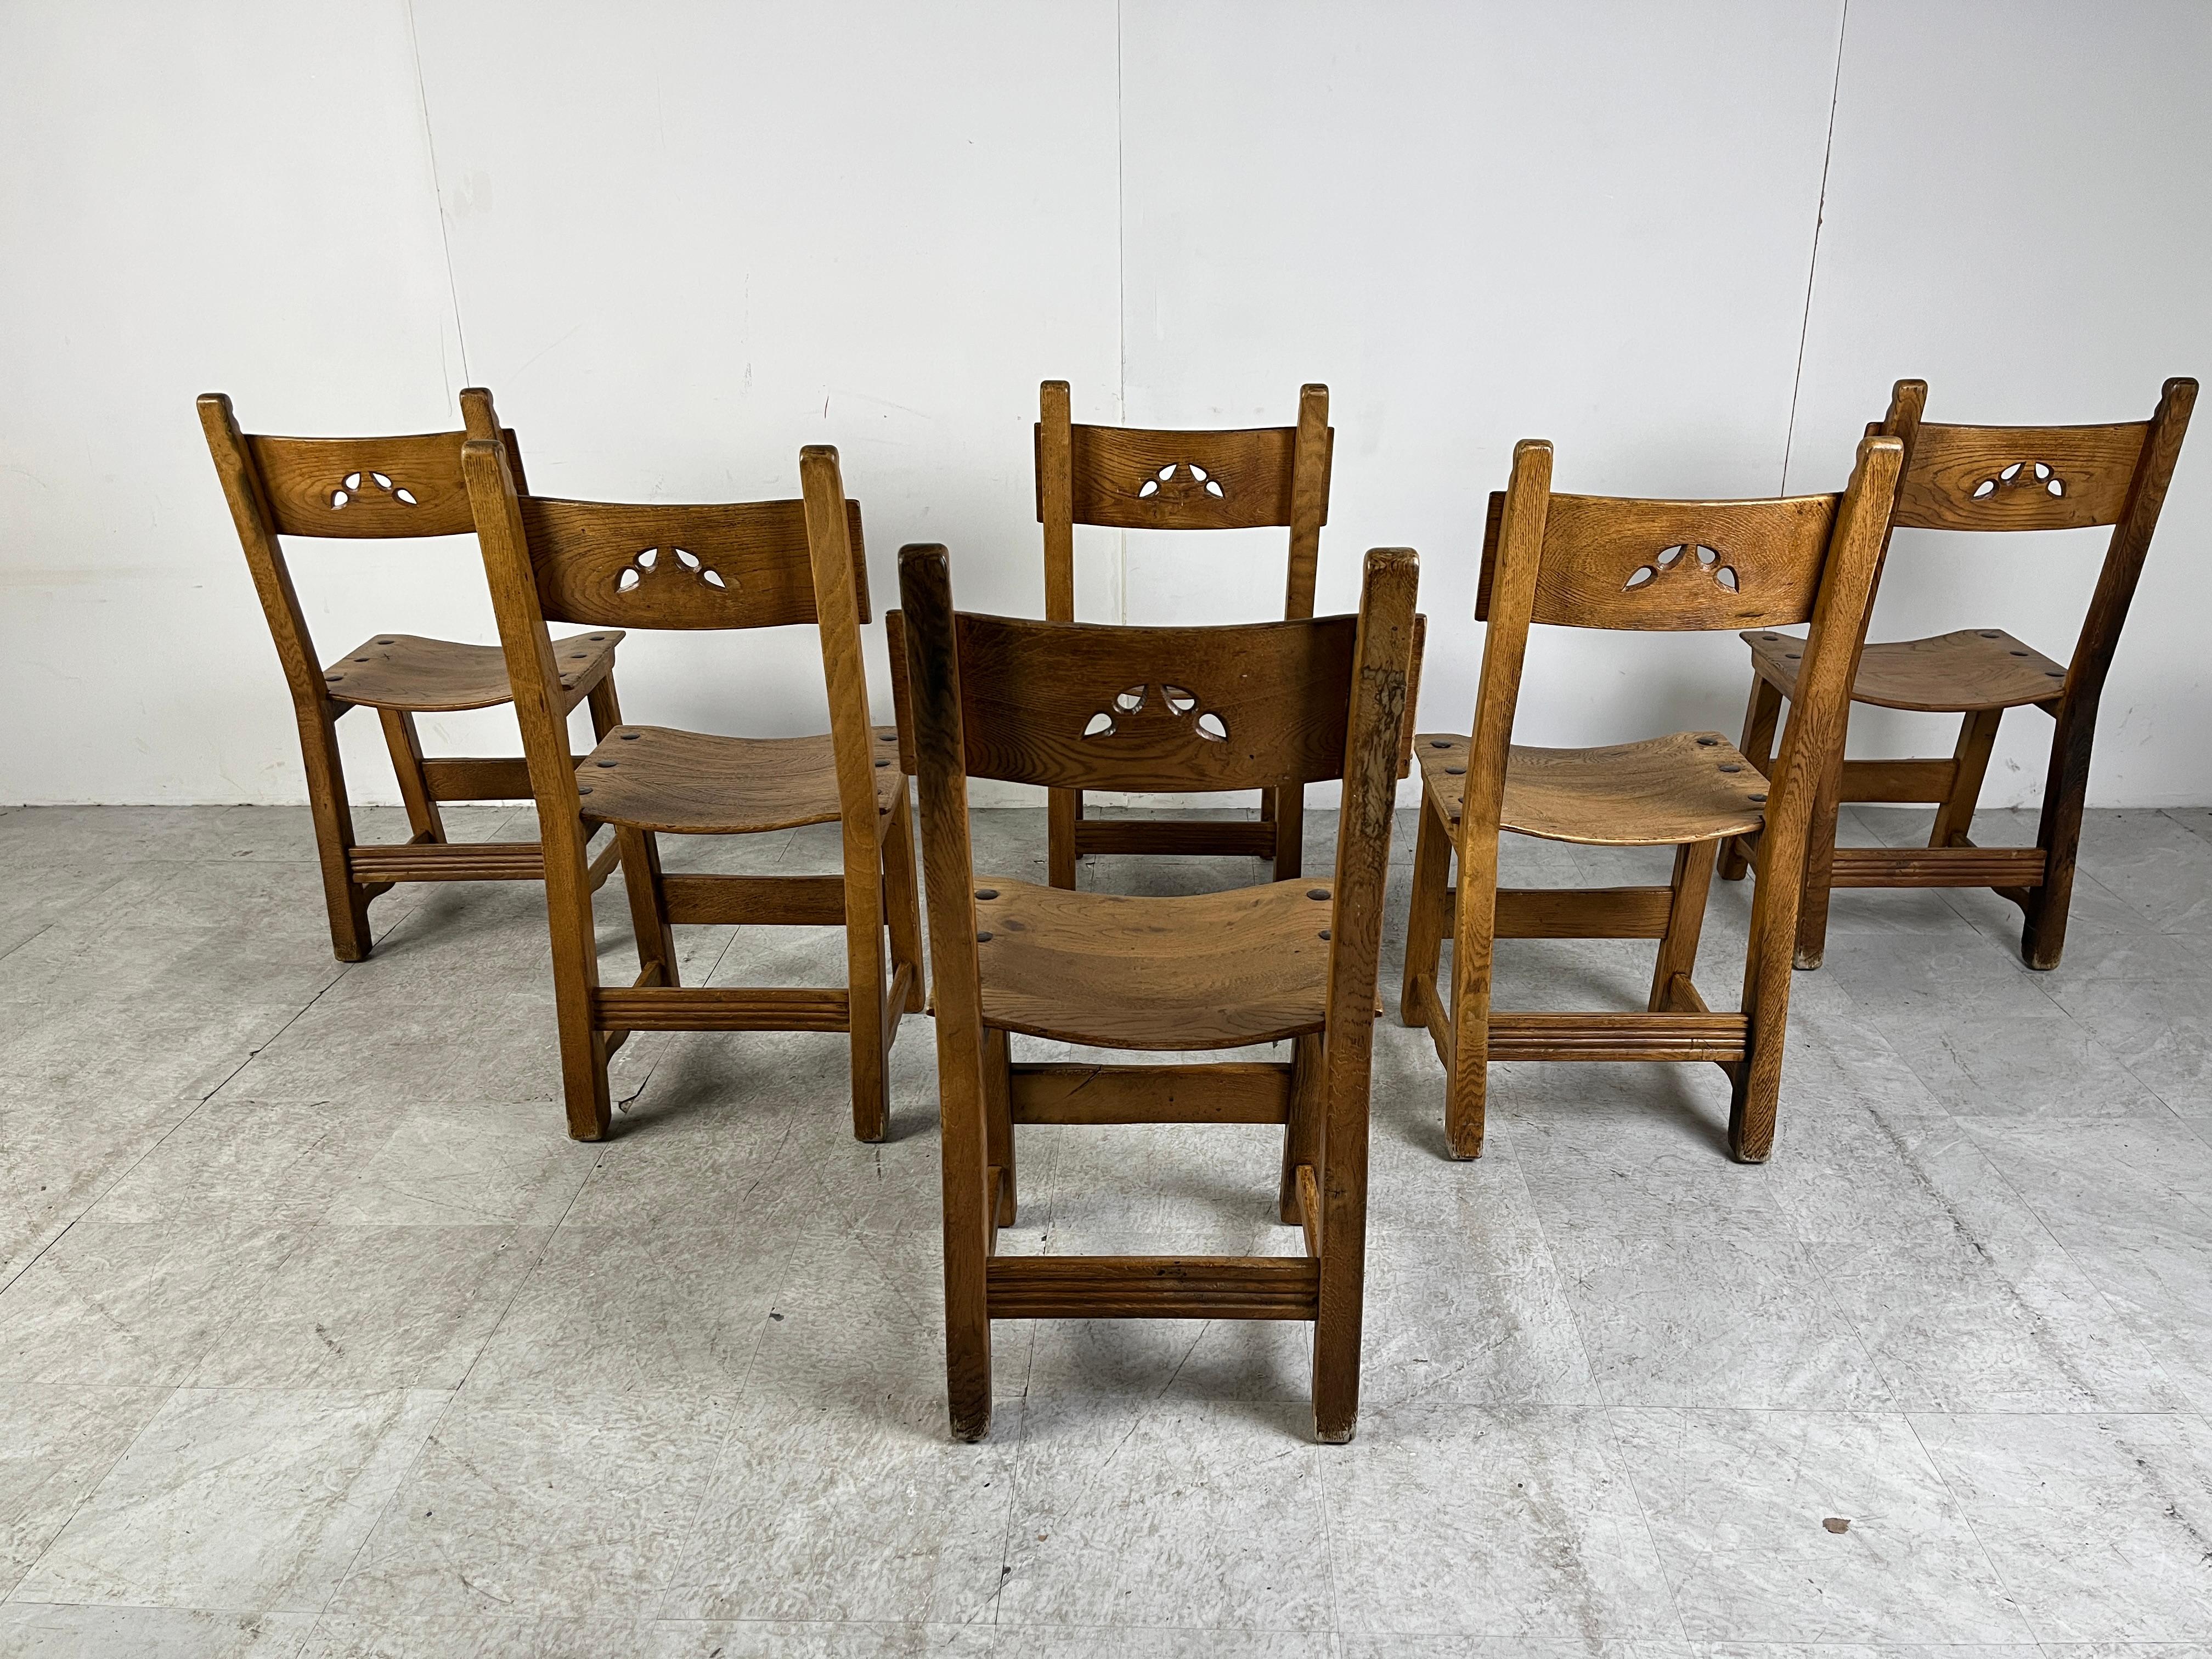 Vintage Spanish carved wooden dining chairs.

Elegant dining chairs wood carvings in the legs and backrests.

Beautiful bentwood seats.

Good condition with normal age related wear. The chairs are sturdy

1950s - Spain

Dimensions:
Height: